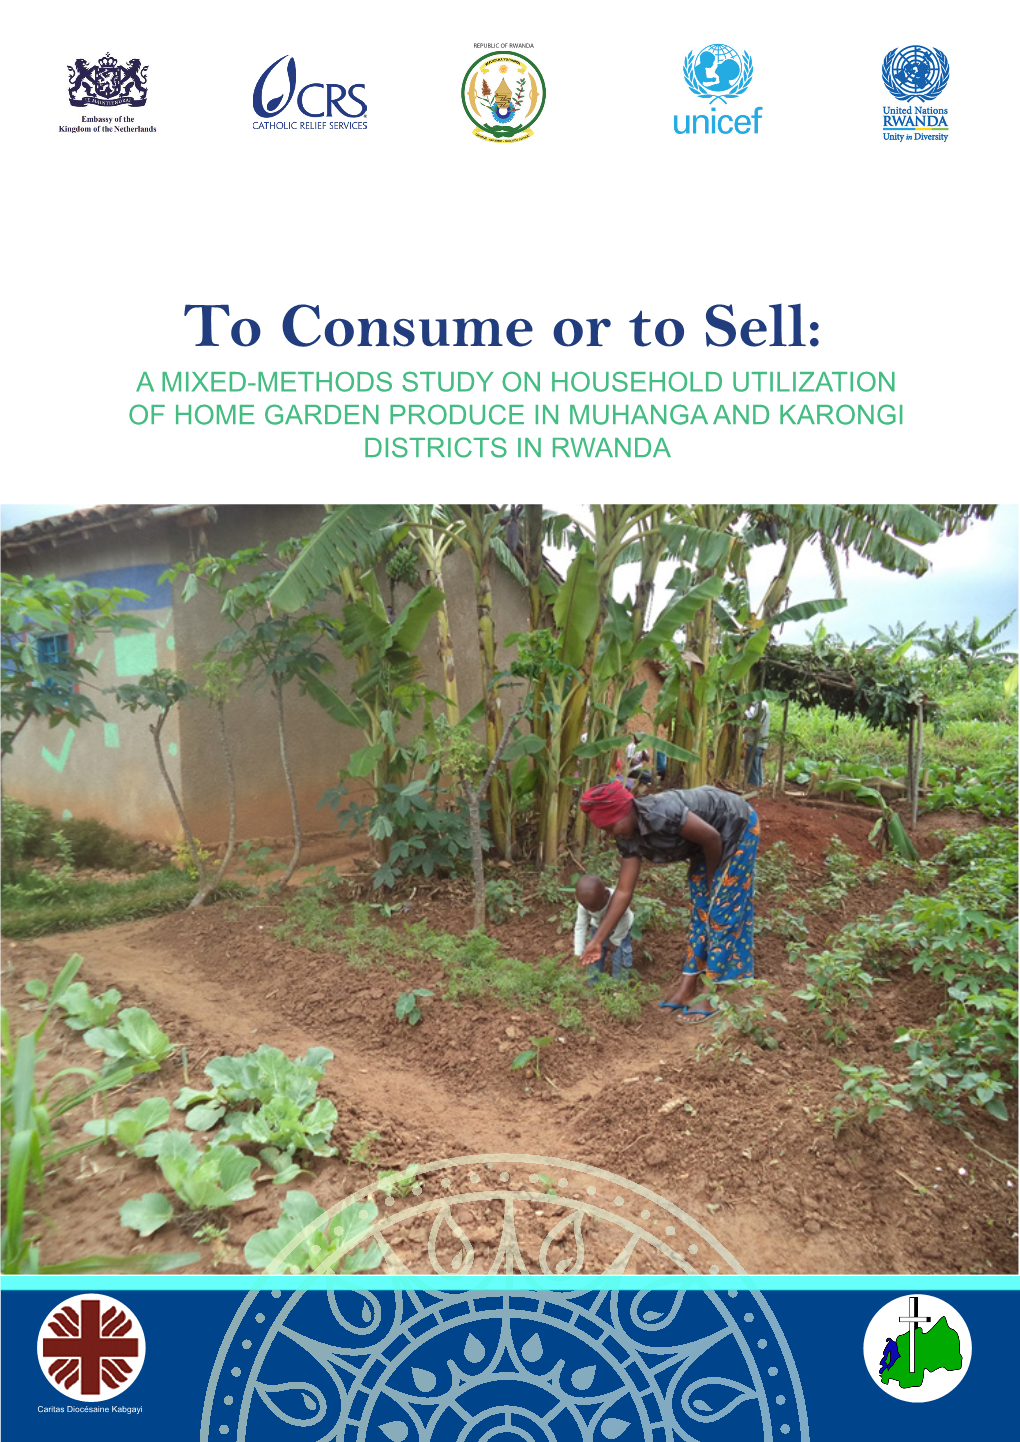 To Consume Or to Sell: a MIXED-METHODS STUDY on HOUSEHOLD UTILIZATION of HOME GARDEN PRODUCE in MUHANGA and KARONGI DISTRICTS in RWANDA